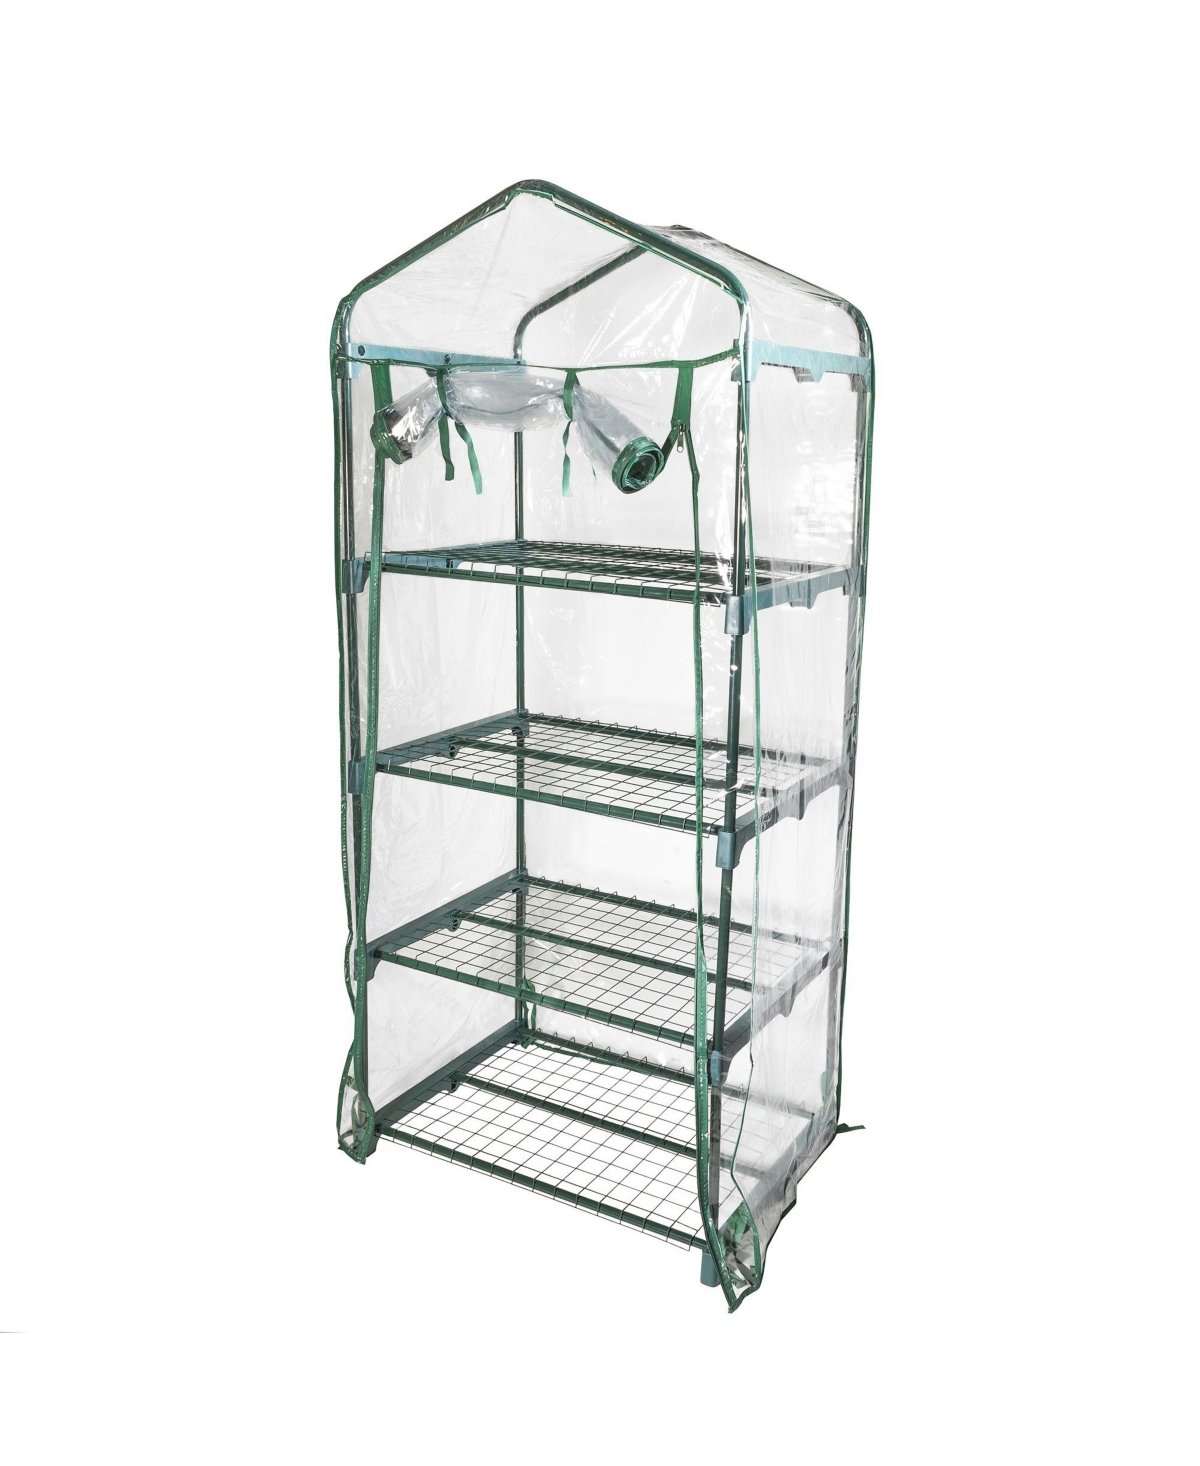 Personal Plastic Indoor Standing Greenhouse For Seed Starting and Propagation, Frost Protection Clear, Small, 27 Inches x 19 Inches x